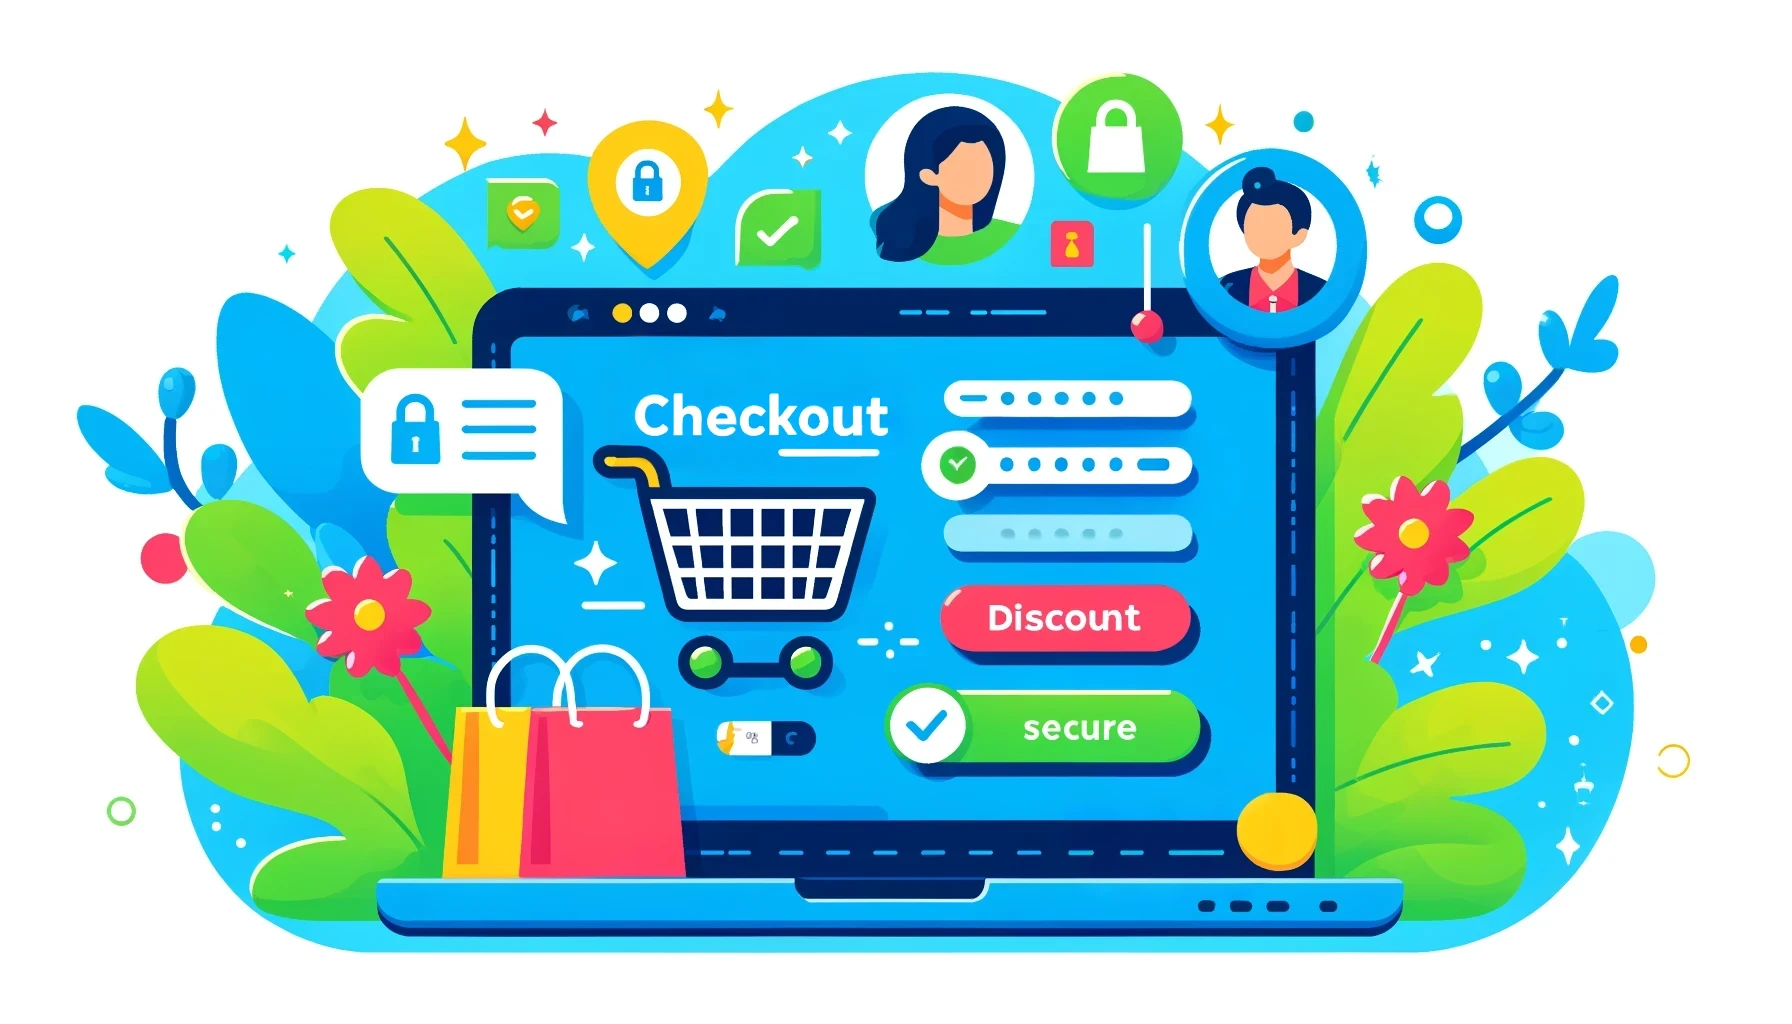  Tailoring the Checkout Experience